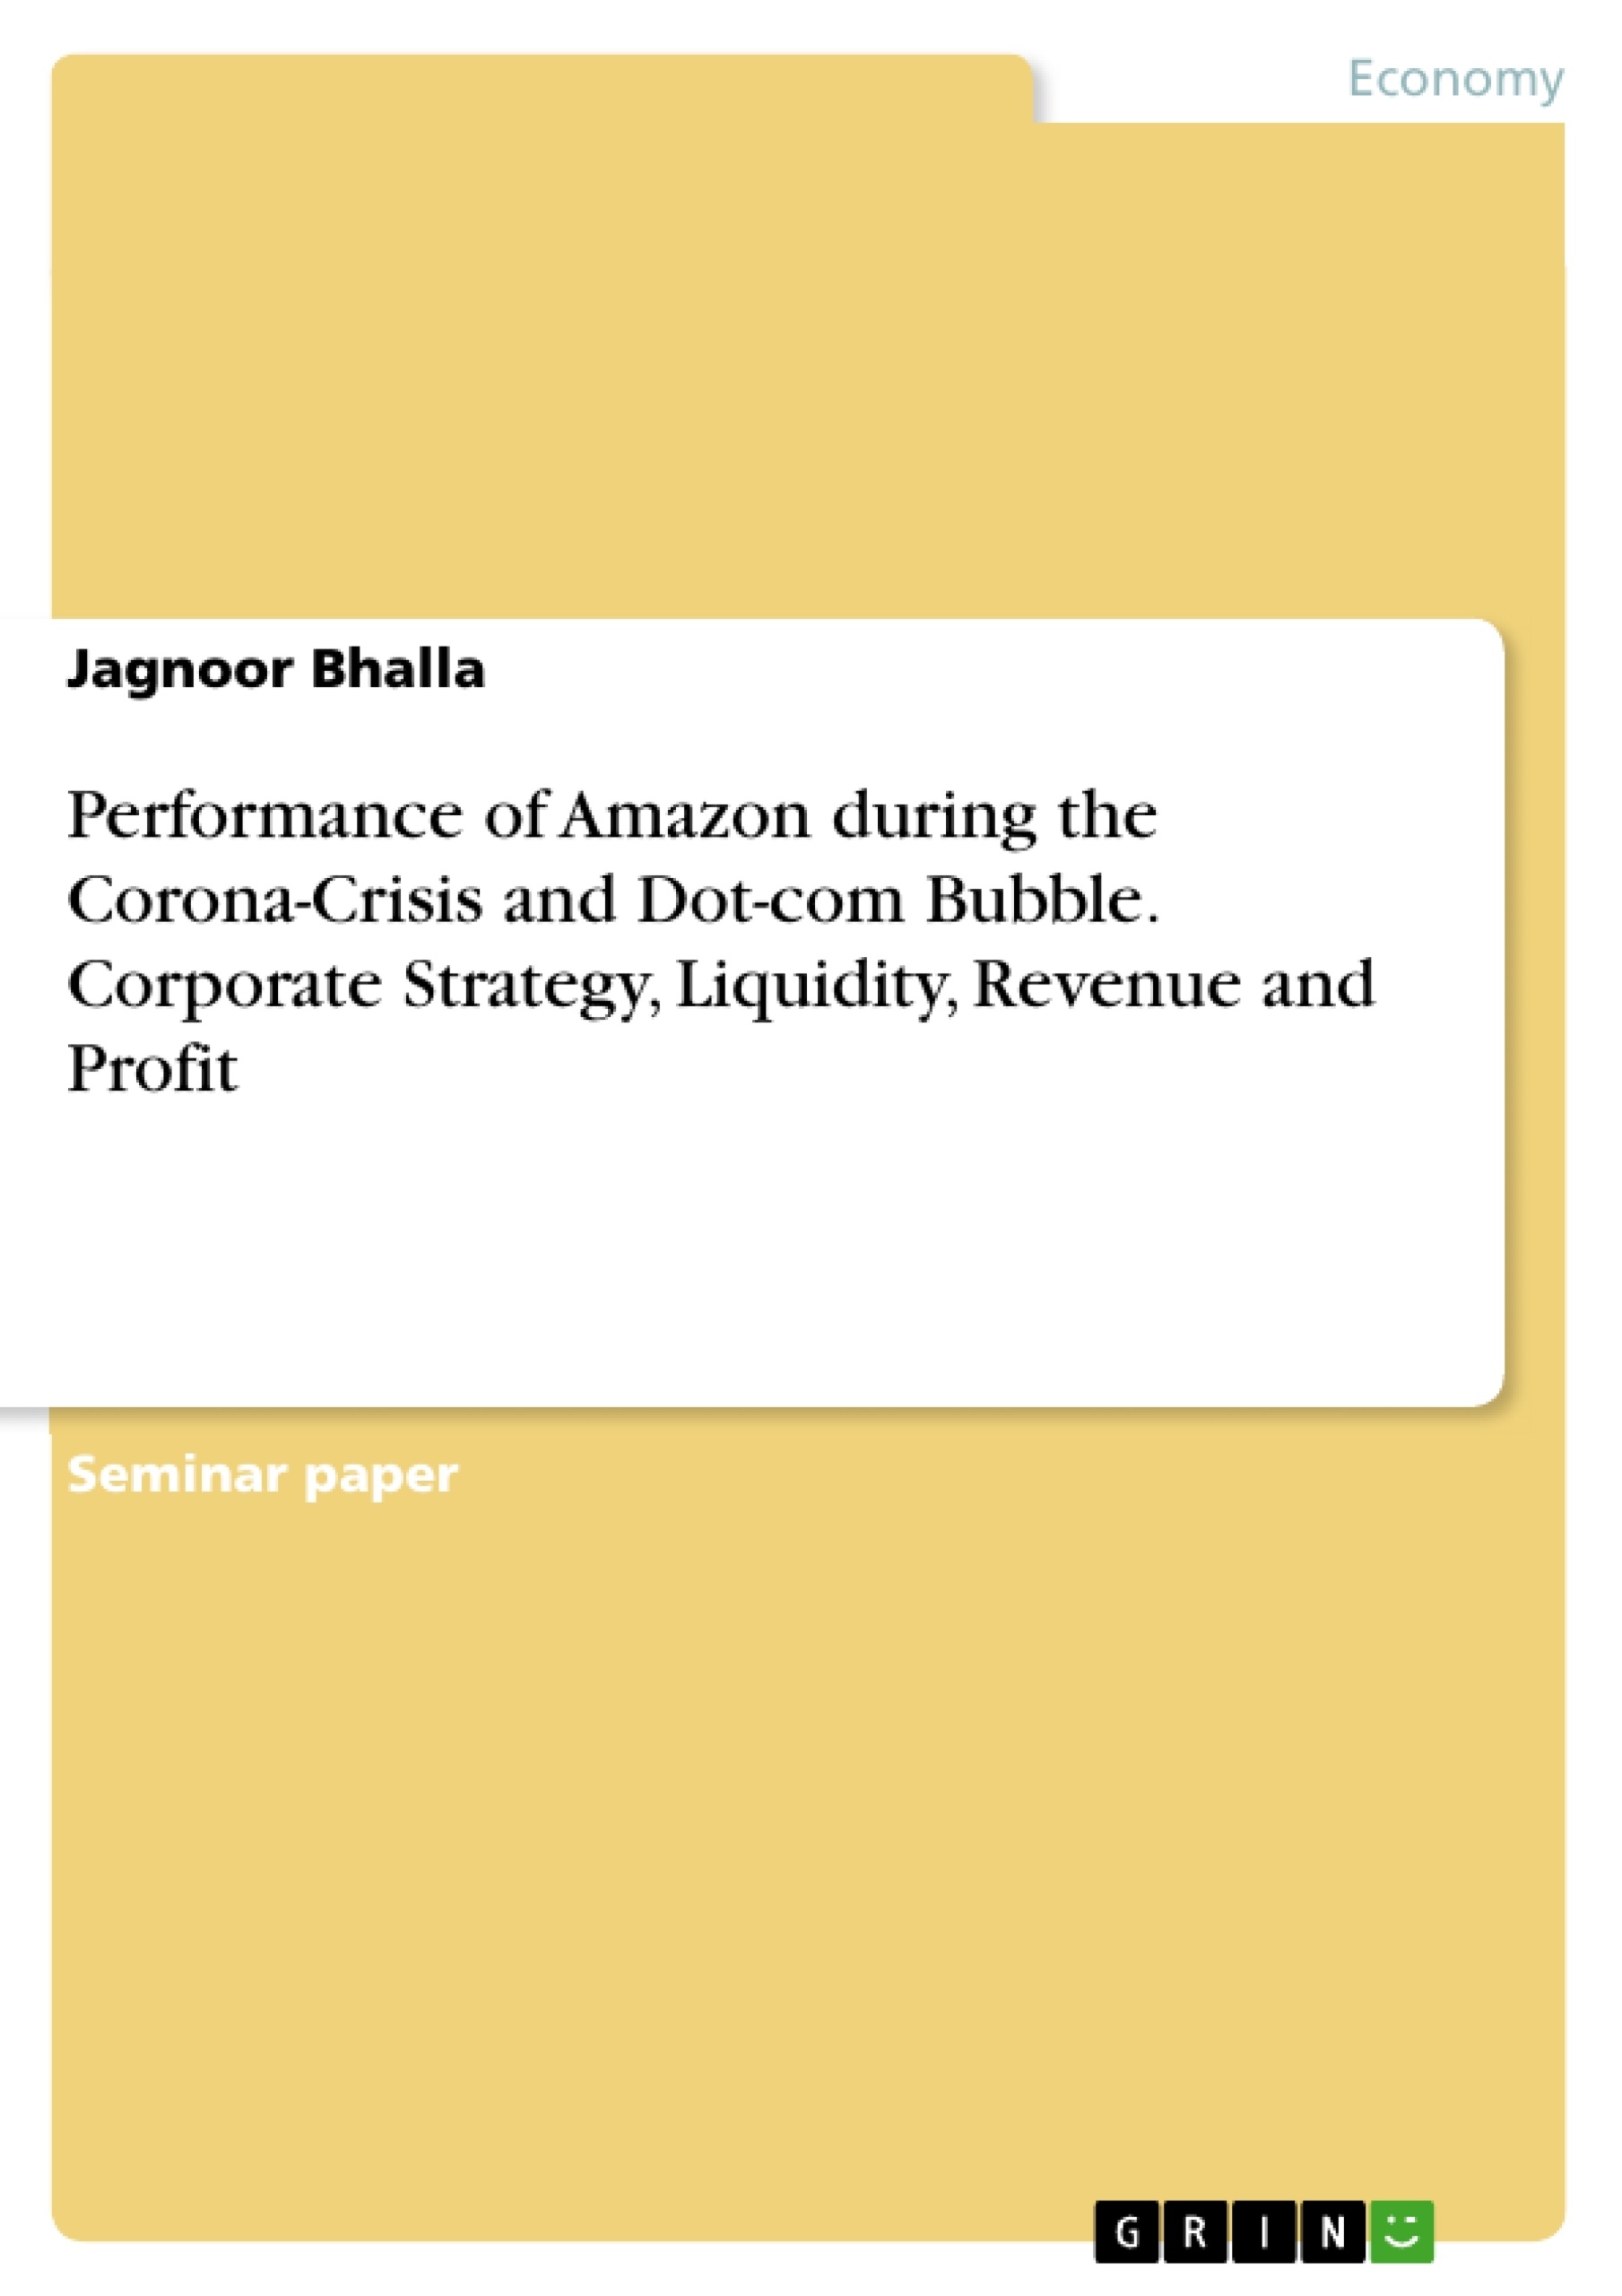 Title: Performance of Amazon during the Corona-Crisis and Dot-com Bubble. Corporate Strategy, Liquidity, Revenue and Profit